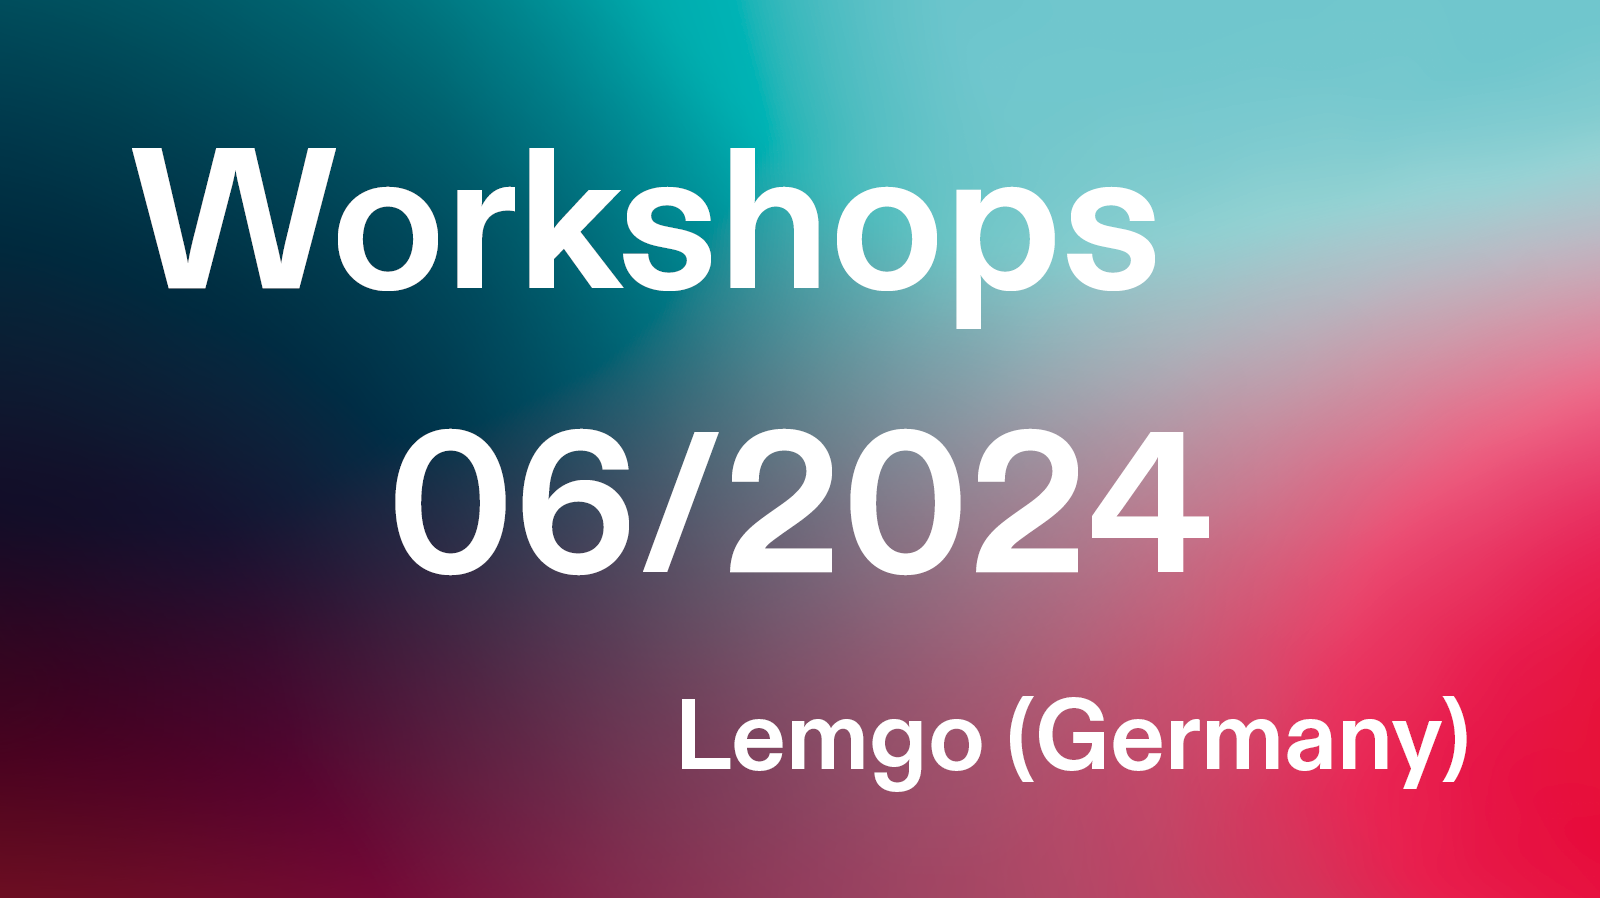 Banner of the IIoT Workshop in Lemgo, Germany in white letters on colorful background.